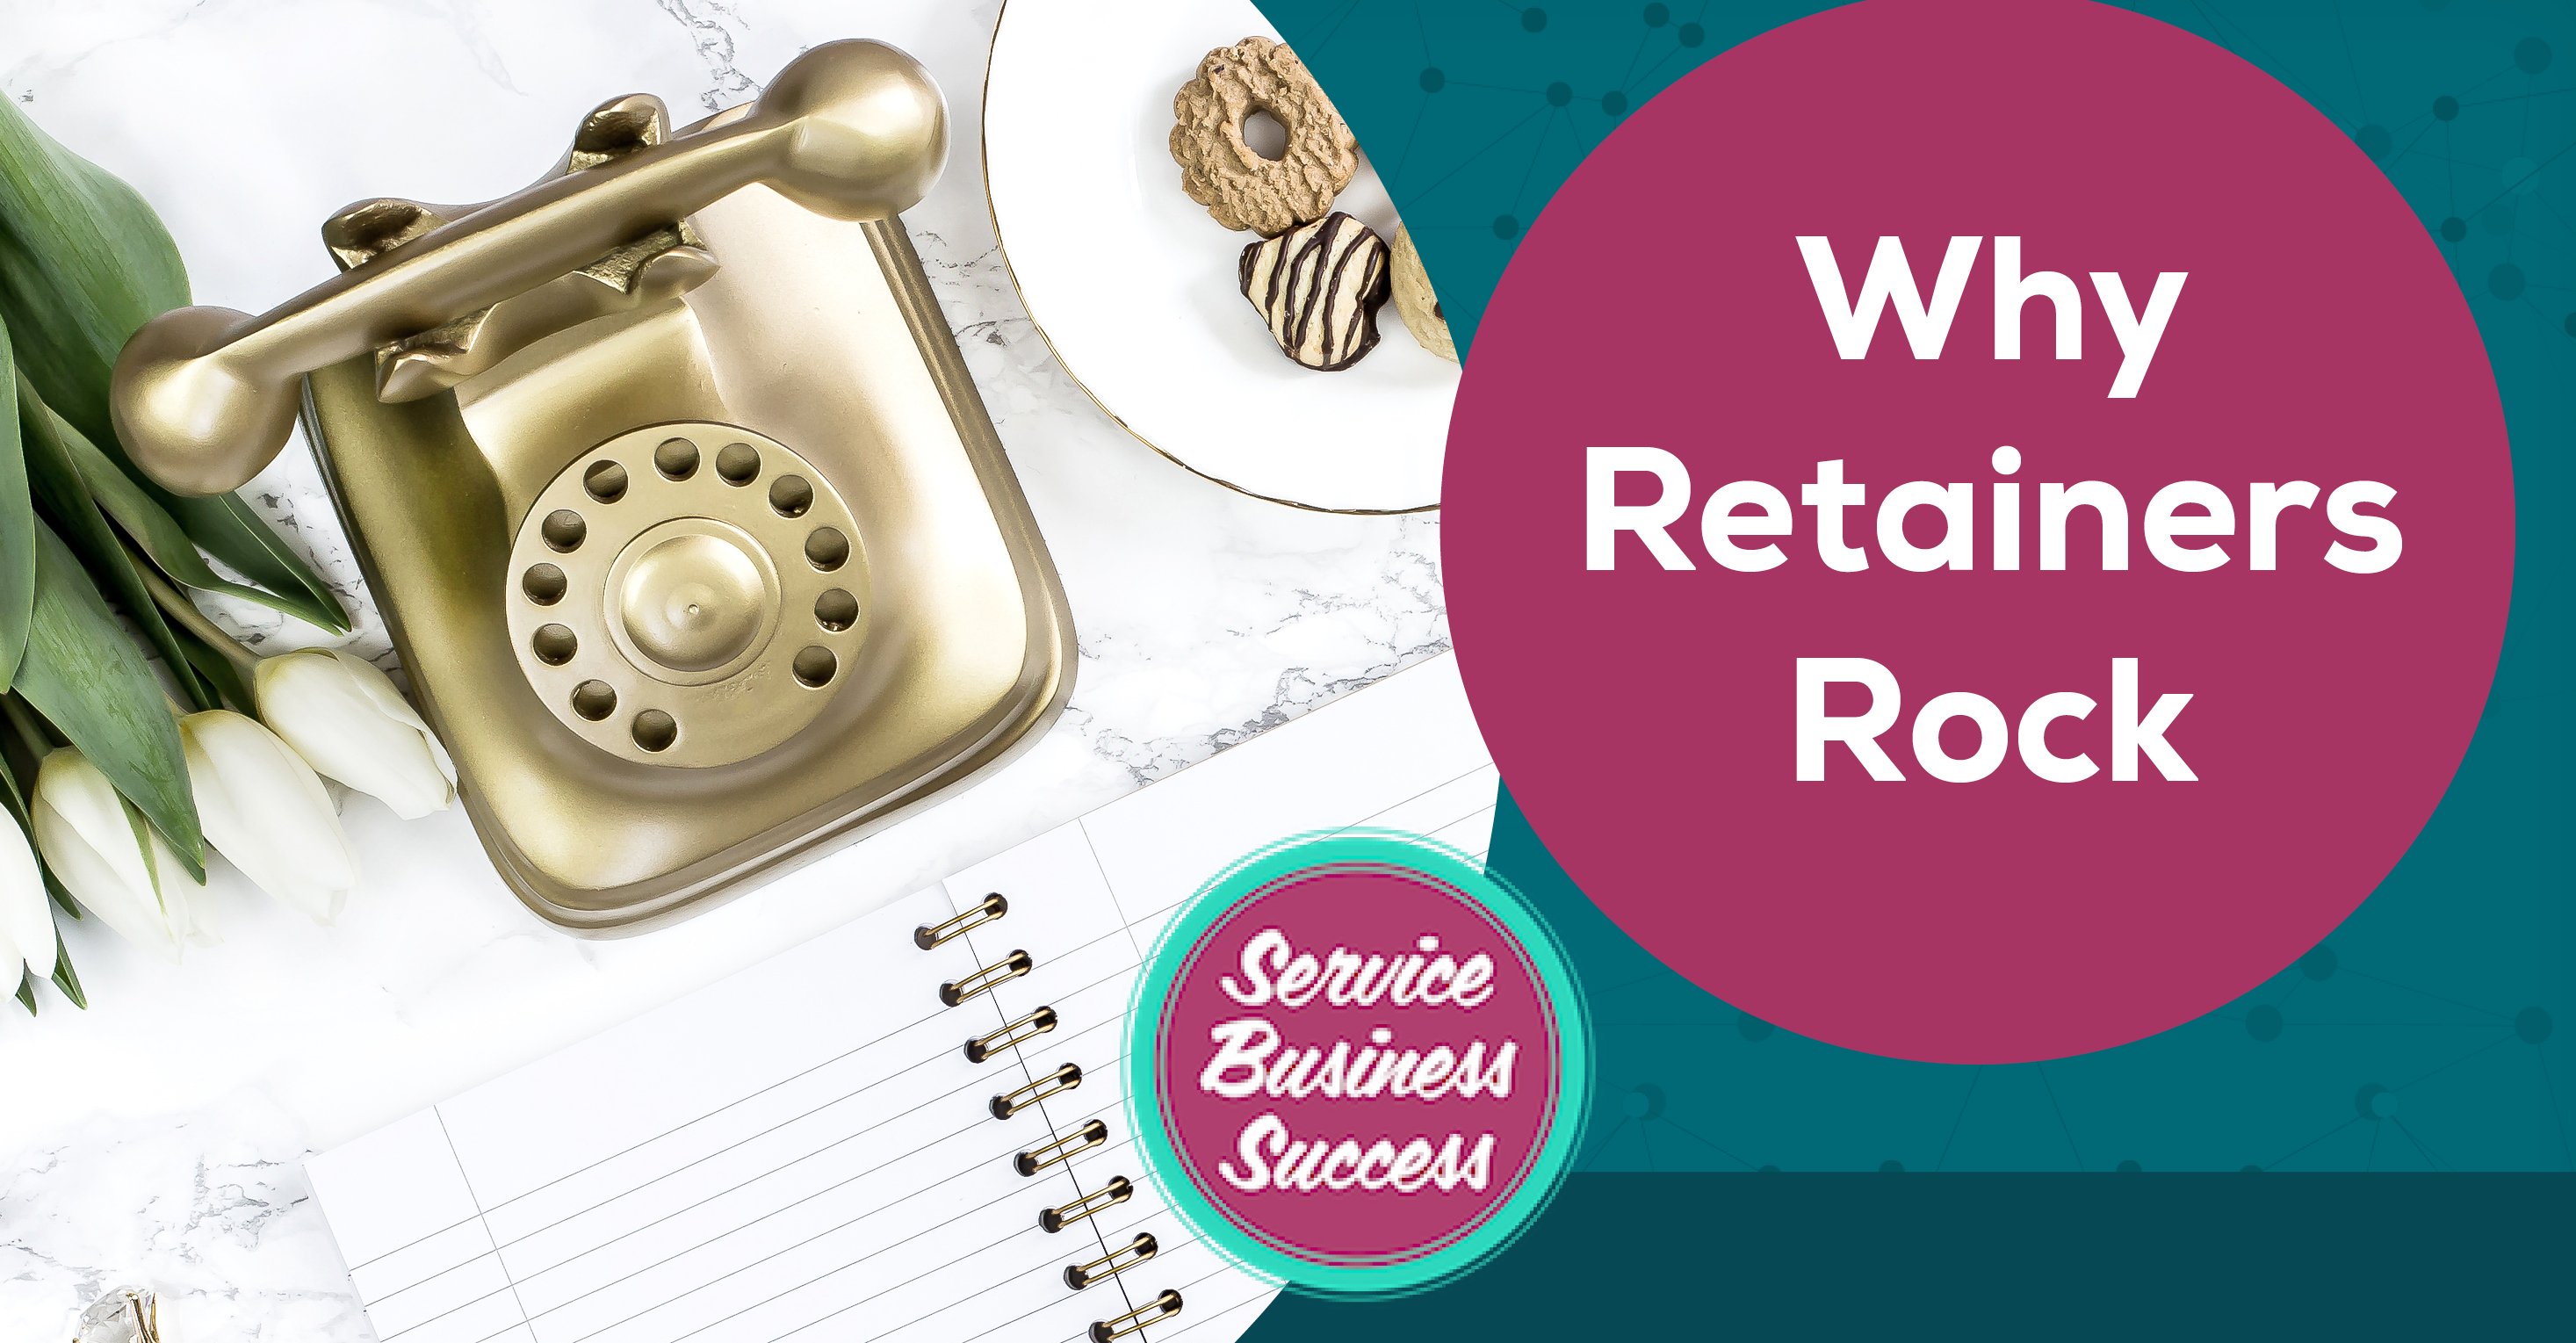 Looking for ways to create stable, ongoing income for your services business? Retainers get a bad rap, but they can work wonders in your business. In this Services Business Success episode, we’re going to chat about retainers for services and why they rock. http://SCOOPINDUSTRIES.COM/episode51/